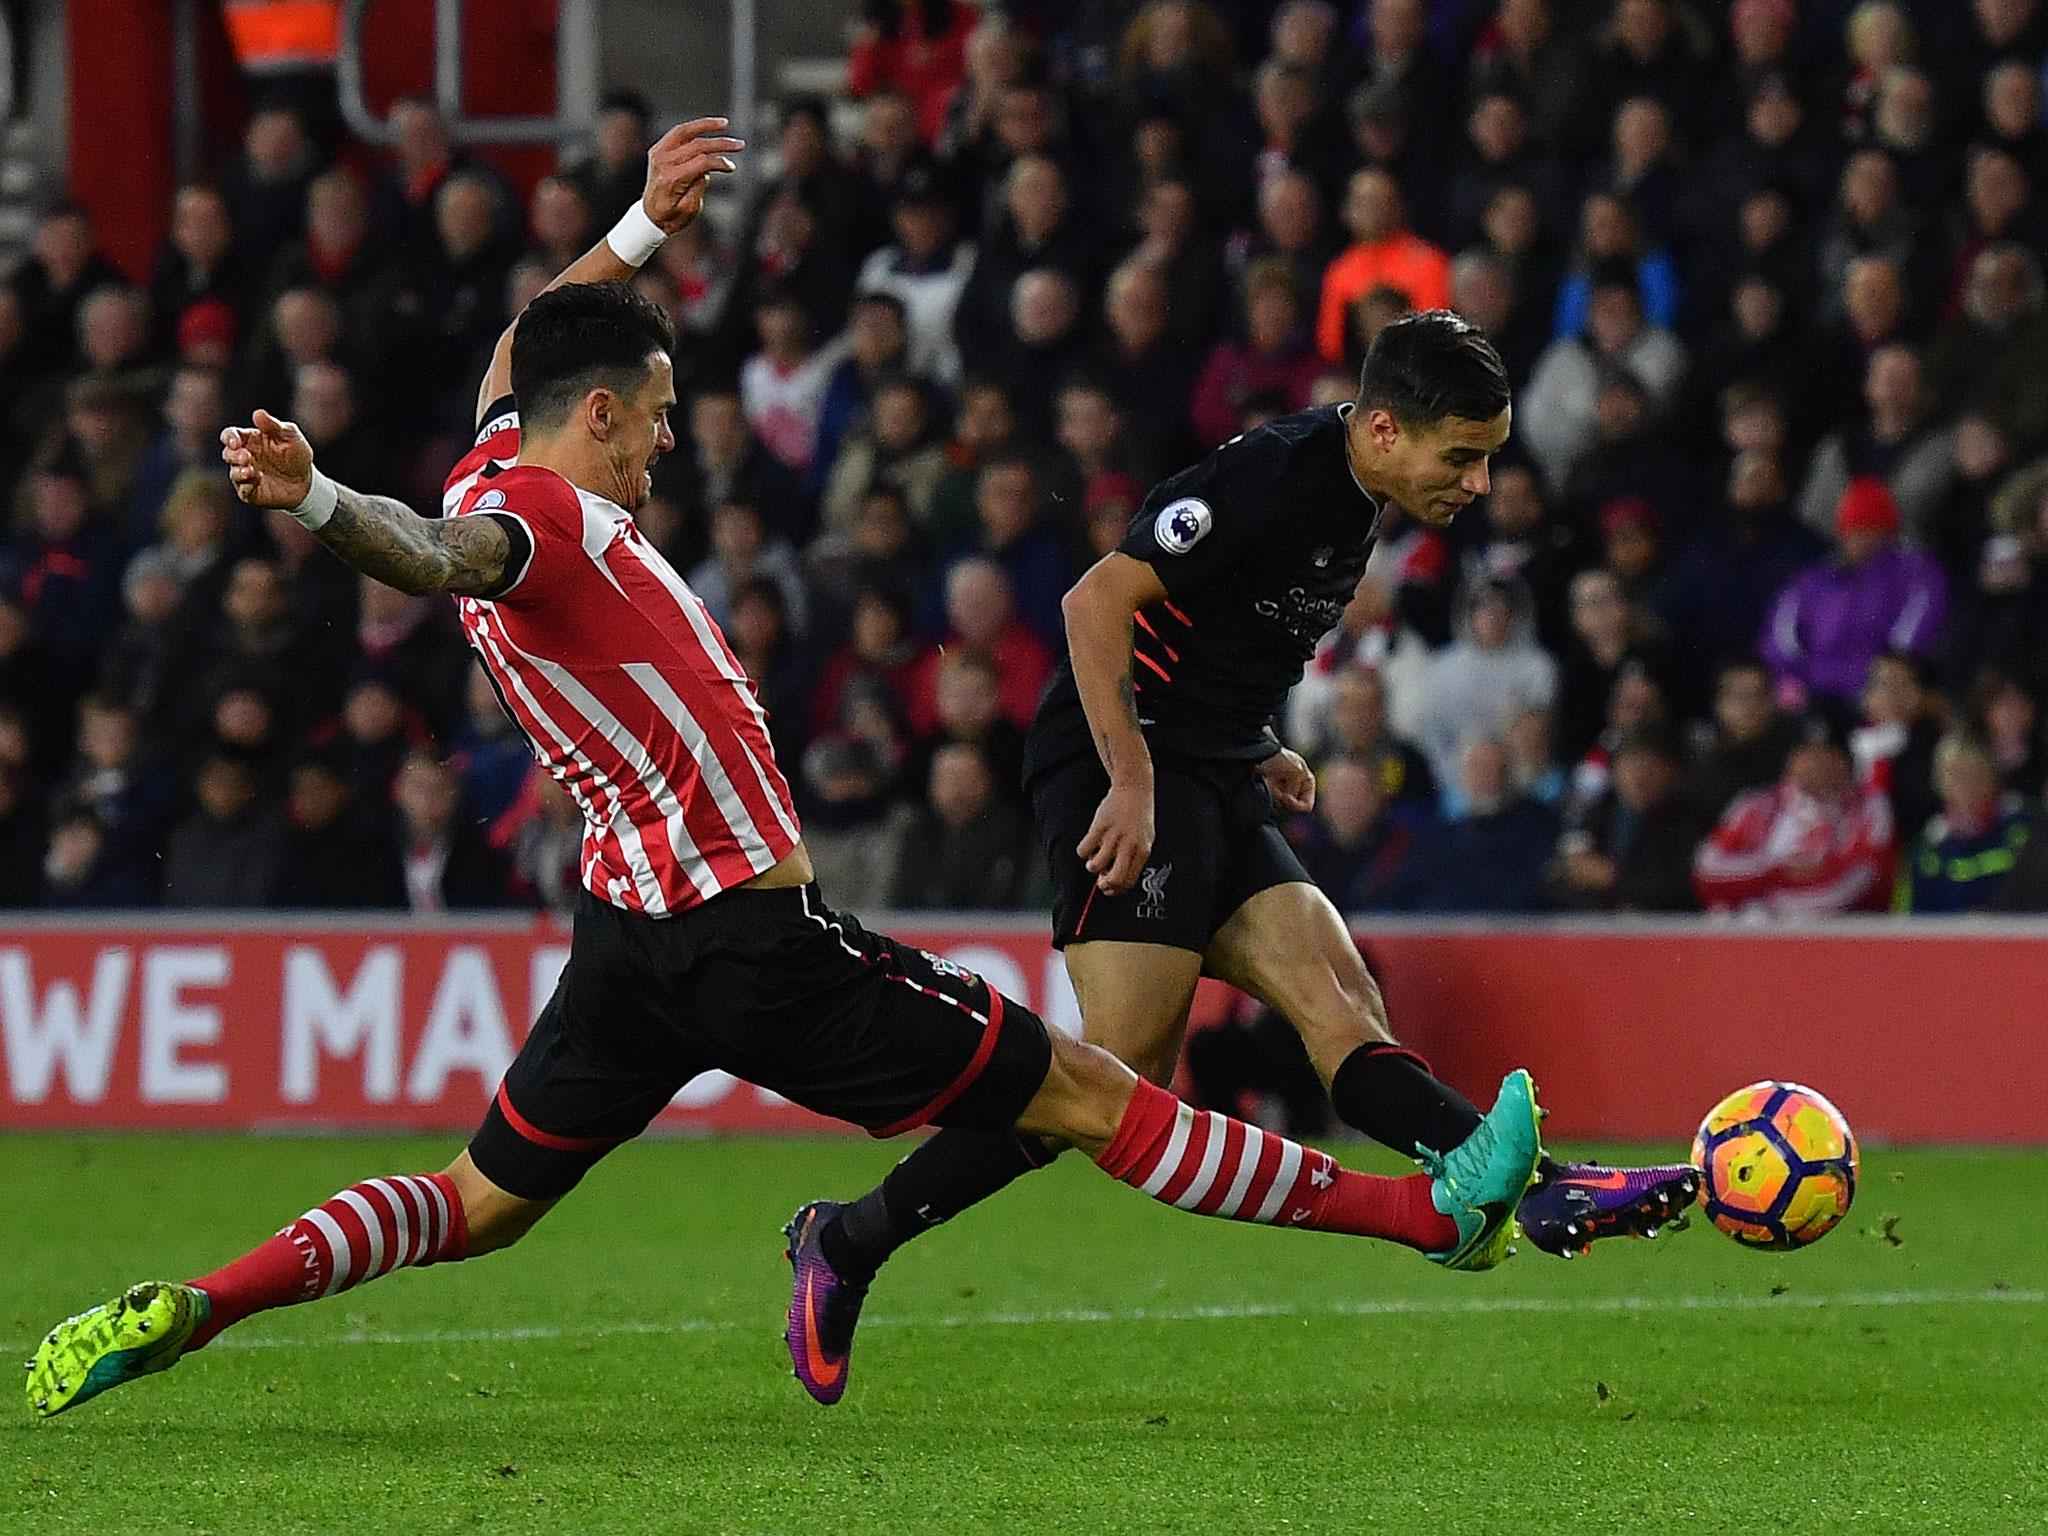 Liverpool failed to turn their chances into goals at St.Mary's